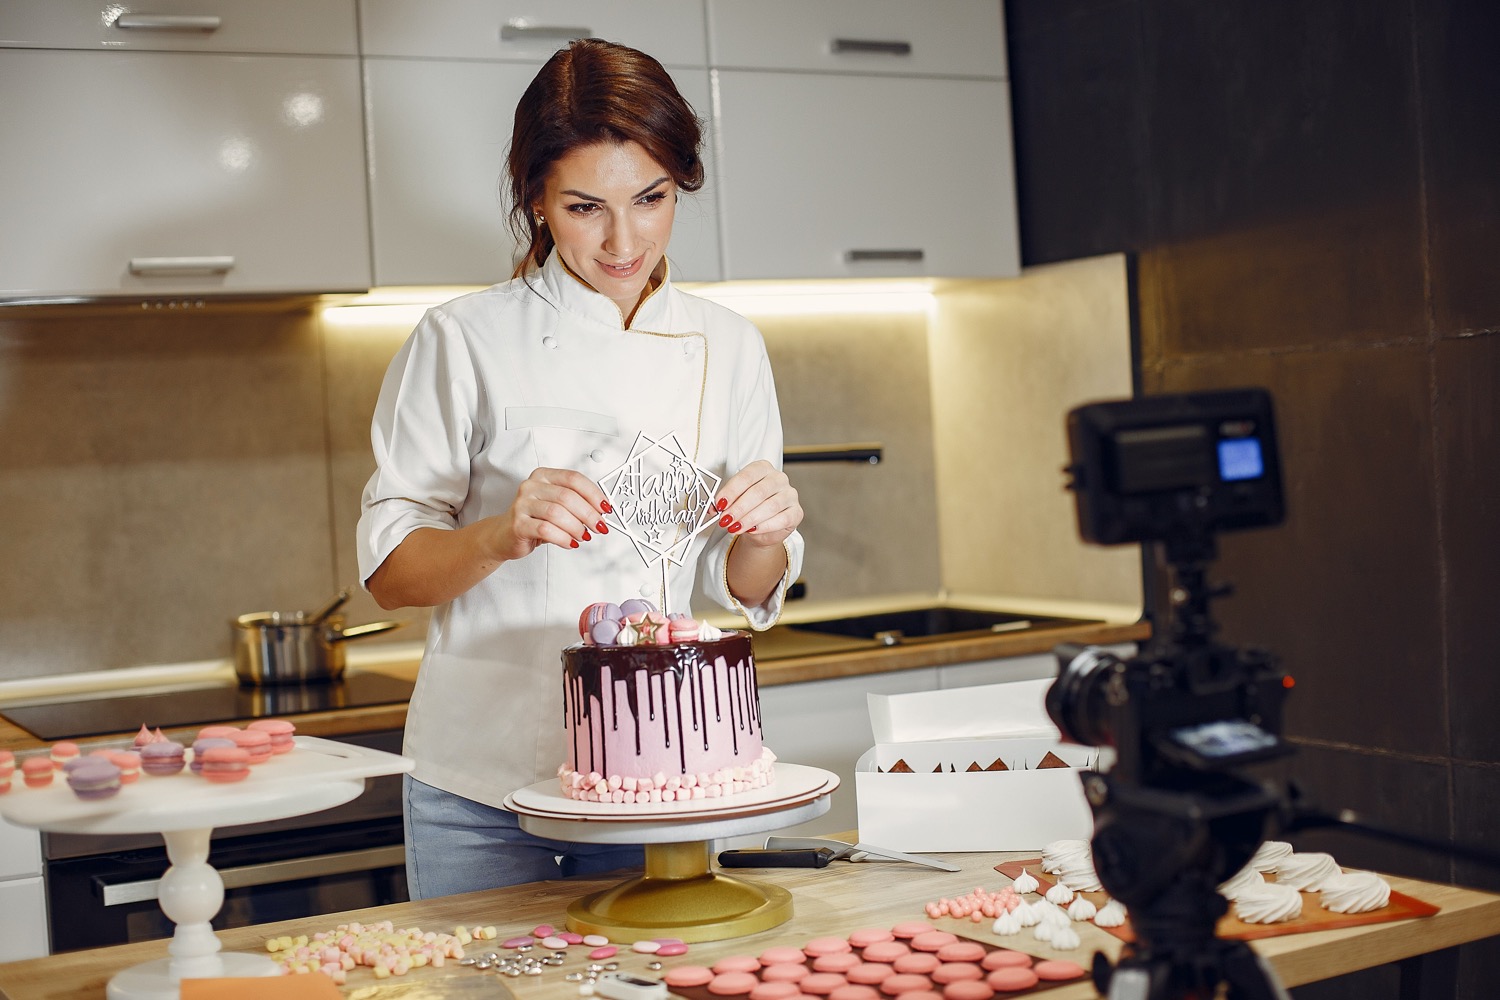 A Professional Videographer's Best Tips for Shooting Great Food Videos